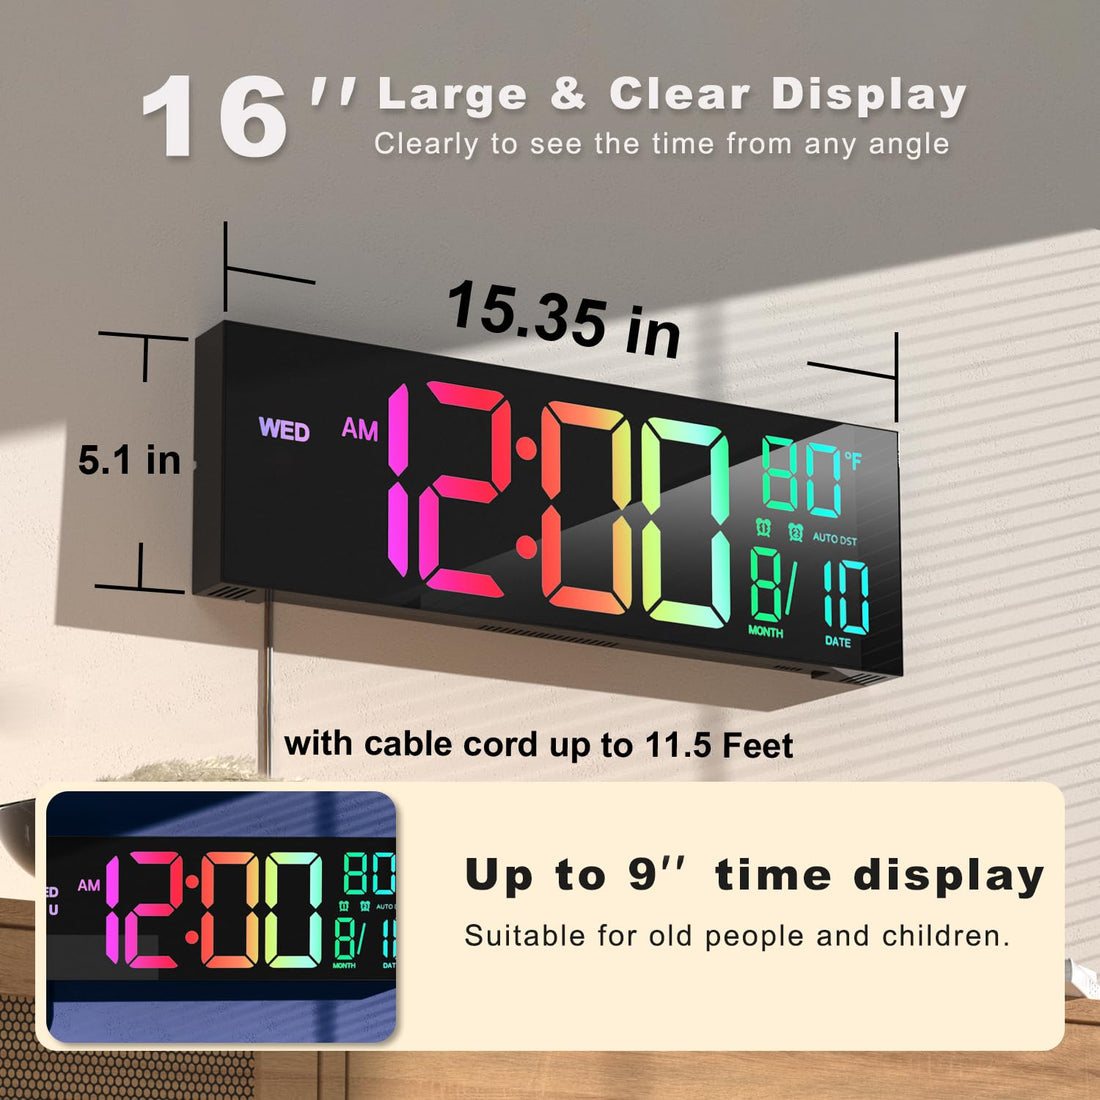 JALL 16" Large Digital Wall Clock with Remote Control, Dual Alarm with Big LED Screen Dispaly, 8 RGB Colors, Auto DST, Temperature for Living Room, Bedroom, Desk Decor, Mounted, Gift for Elderly